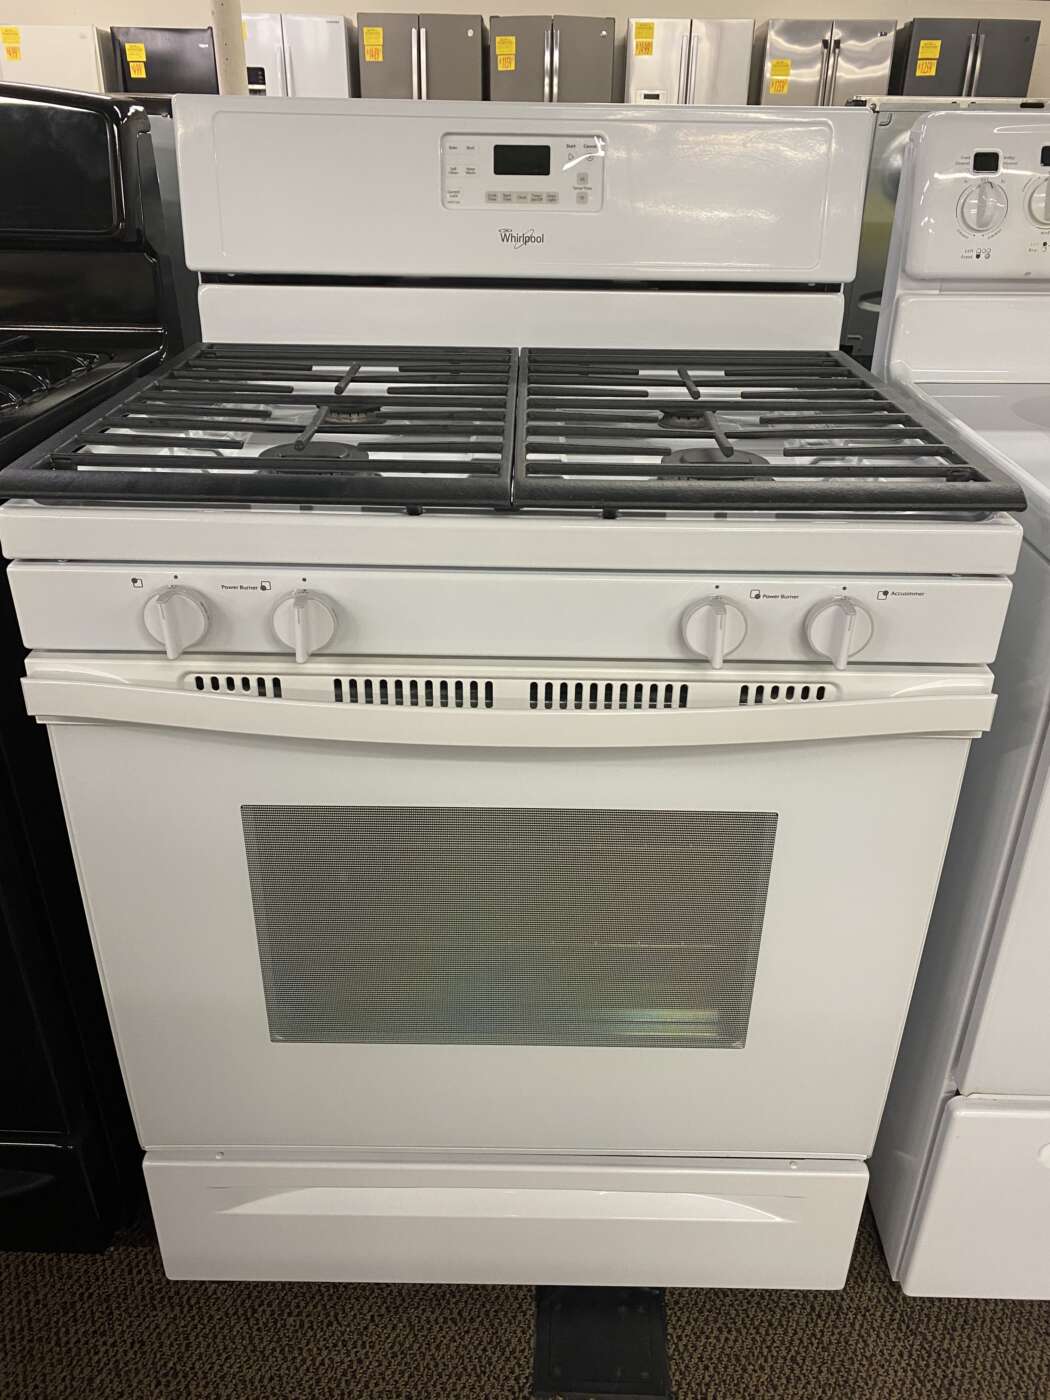 Reconditioned WHIRLPOOL Self-Clean Oven GAS Range – White